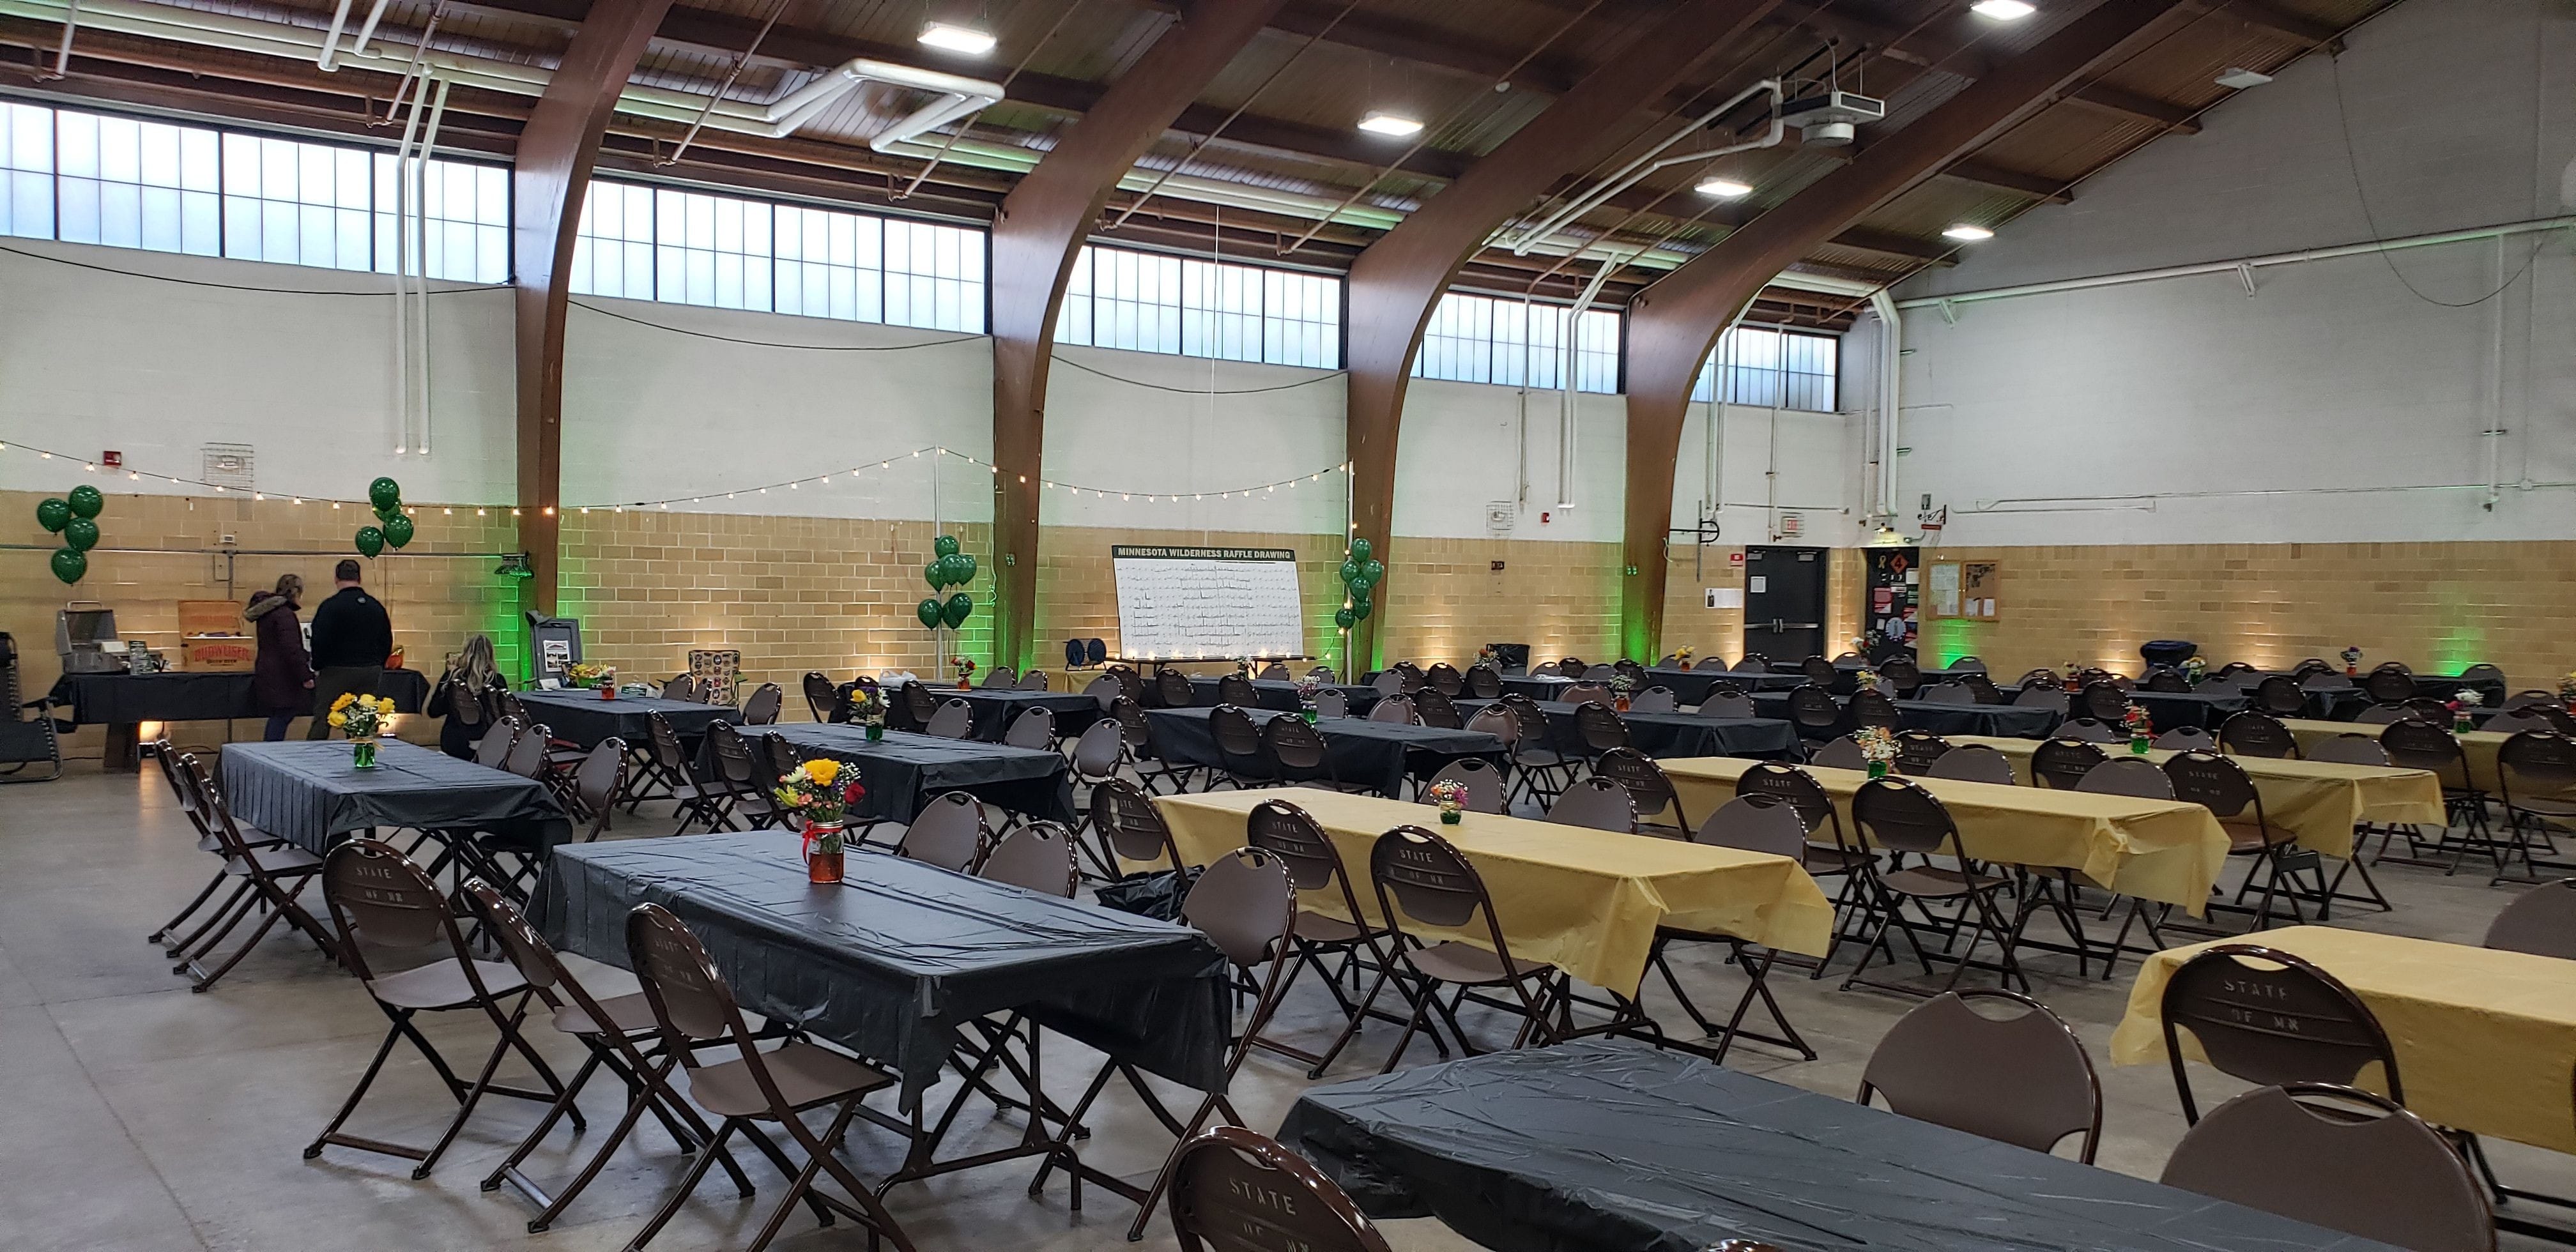 Wedding lighting at the Cloquet Armory by Duluth Event Lighting. Up lighting in green and soft white.